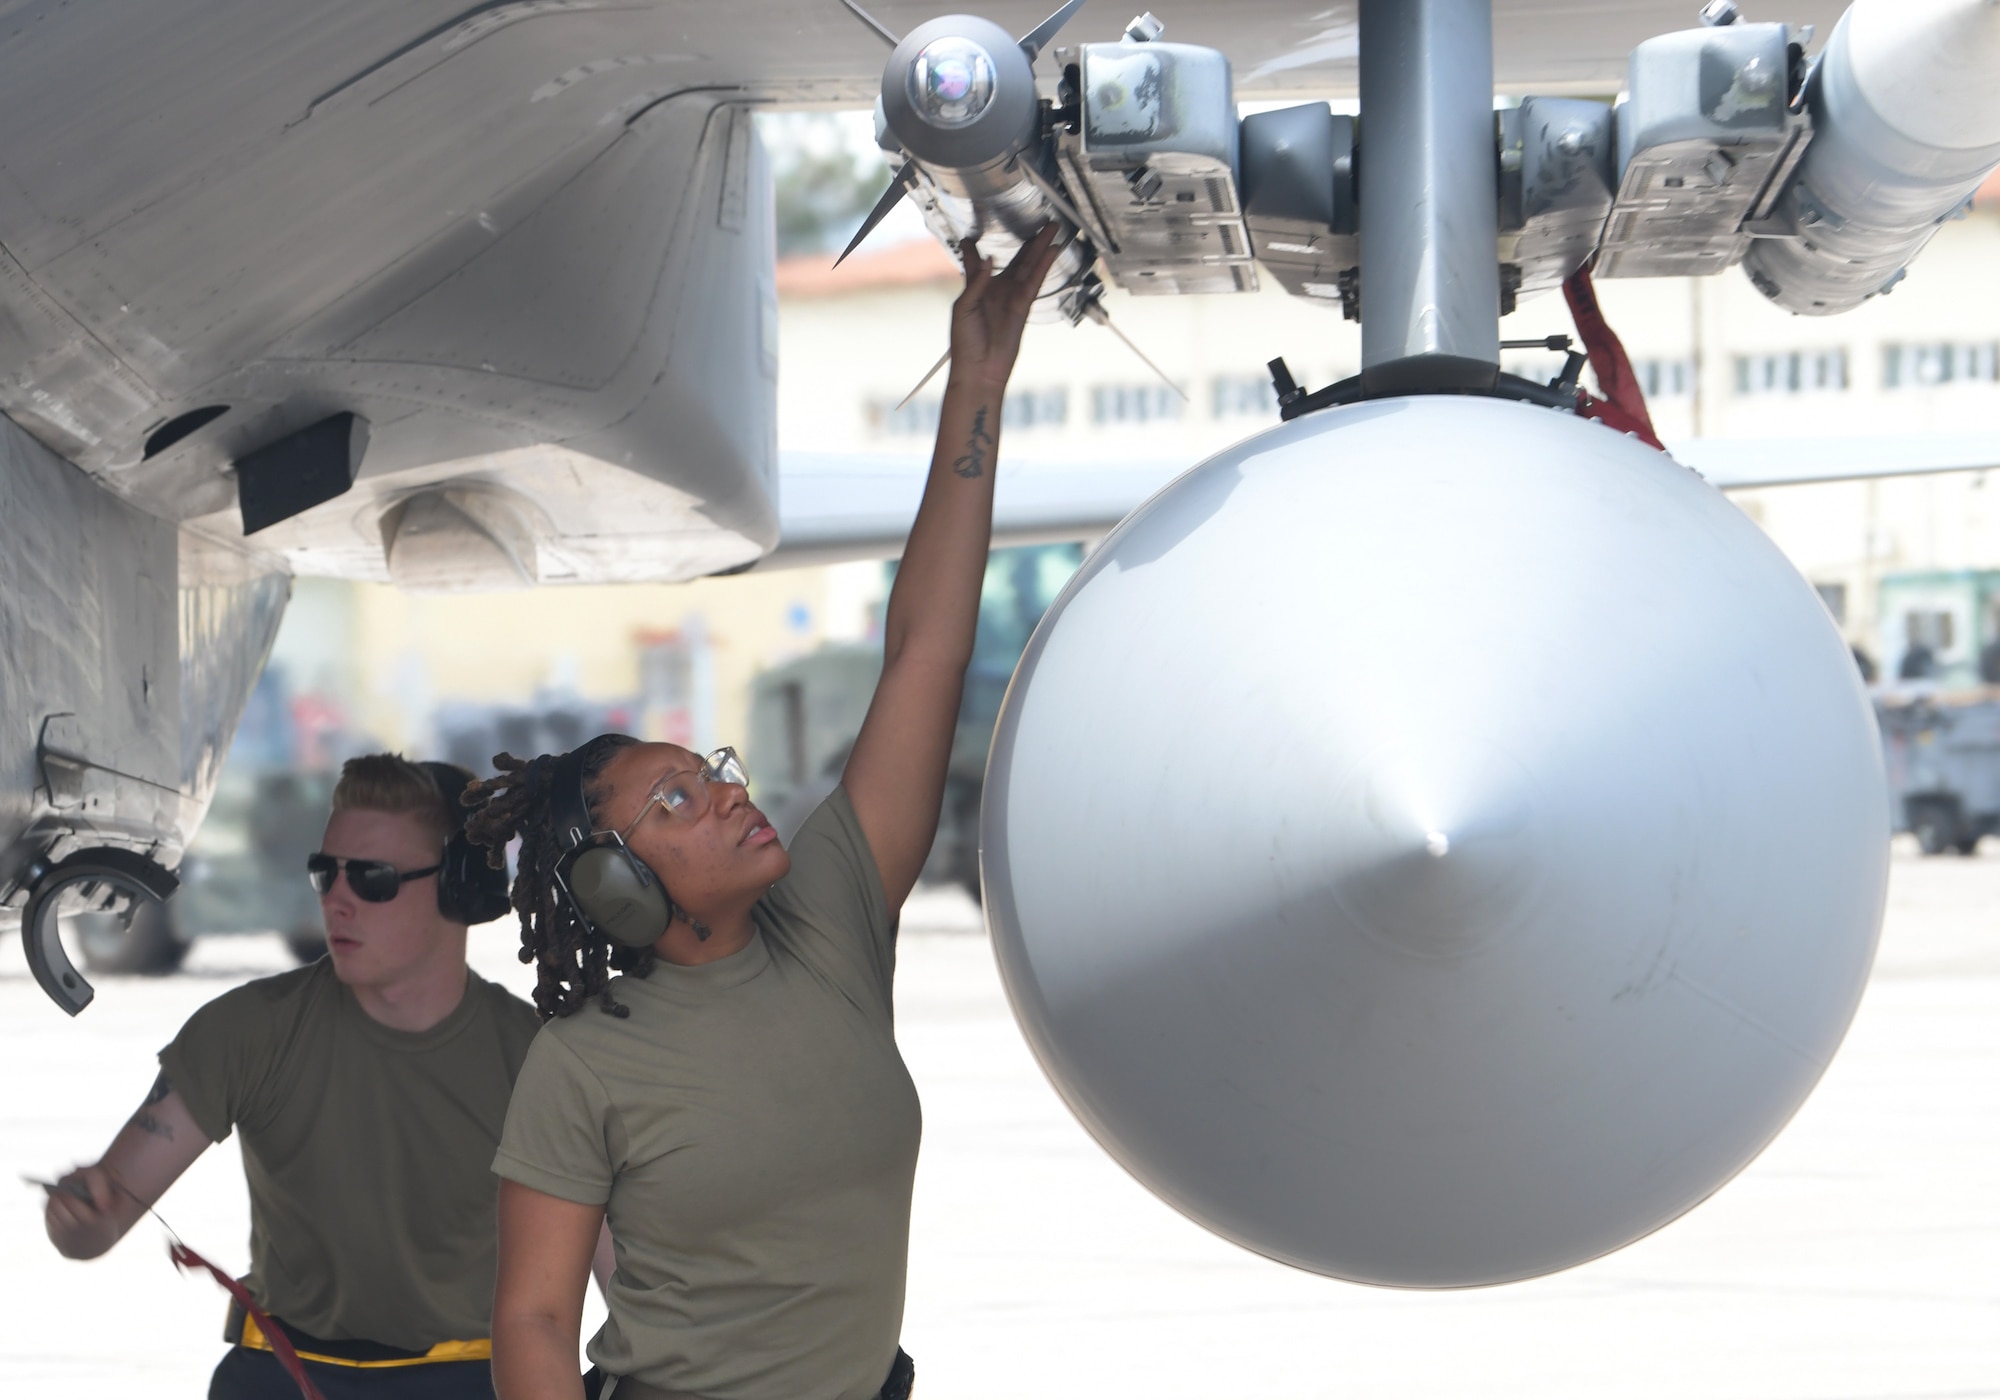 U.S. Air Force Staff Sgt. Jemara McCoy, 493rd Aircraft Maintenance Unit weapons load crew team chief, disarms munitions on an F-15C Eagle assigned to the 493rd Fighter Squadron during exercise Astral Knight 21 at Larissa Air Base, Greece, May 20, 2021. The 48th Fighter Wing trained and integrated with allied NATO nations during Astral Knight 21, May 17 - 21, 2021, strengthening partnerships and rapid deployment capabilities. (U.S. Air Force photo by Tech. Sgt. Alex Fox Echols III)